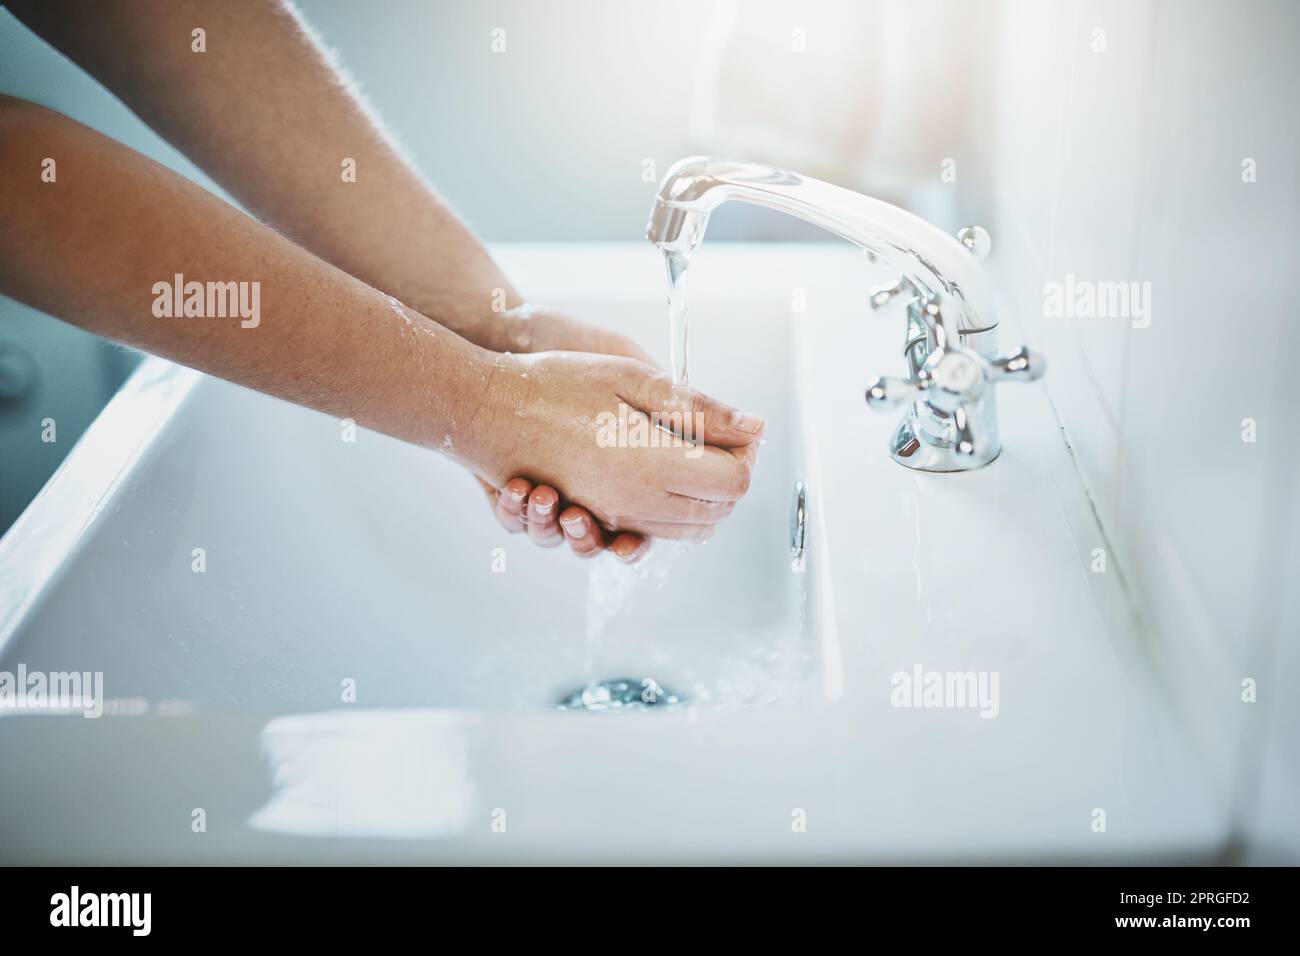 Healthy hand washing habits. hands being washed at a tap. Stock Photo